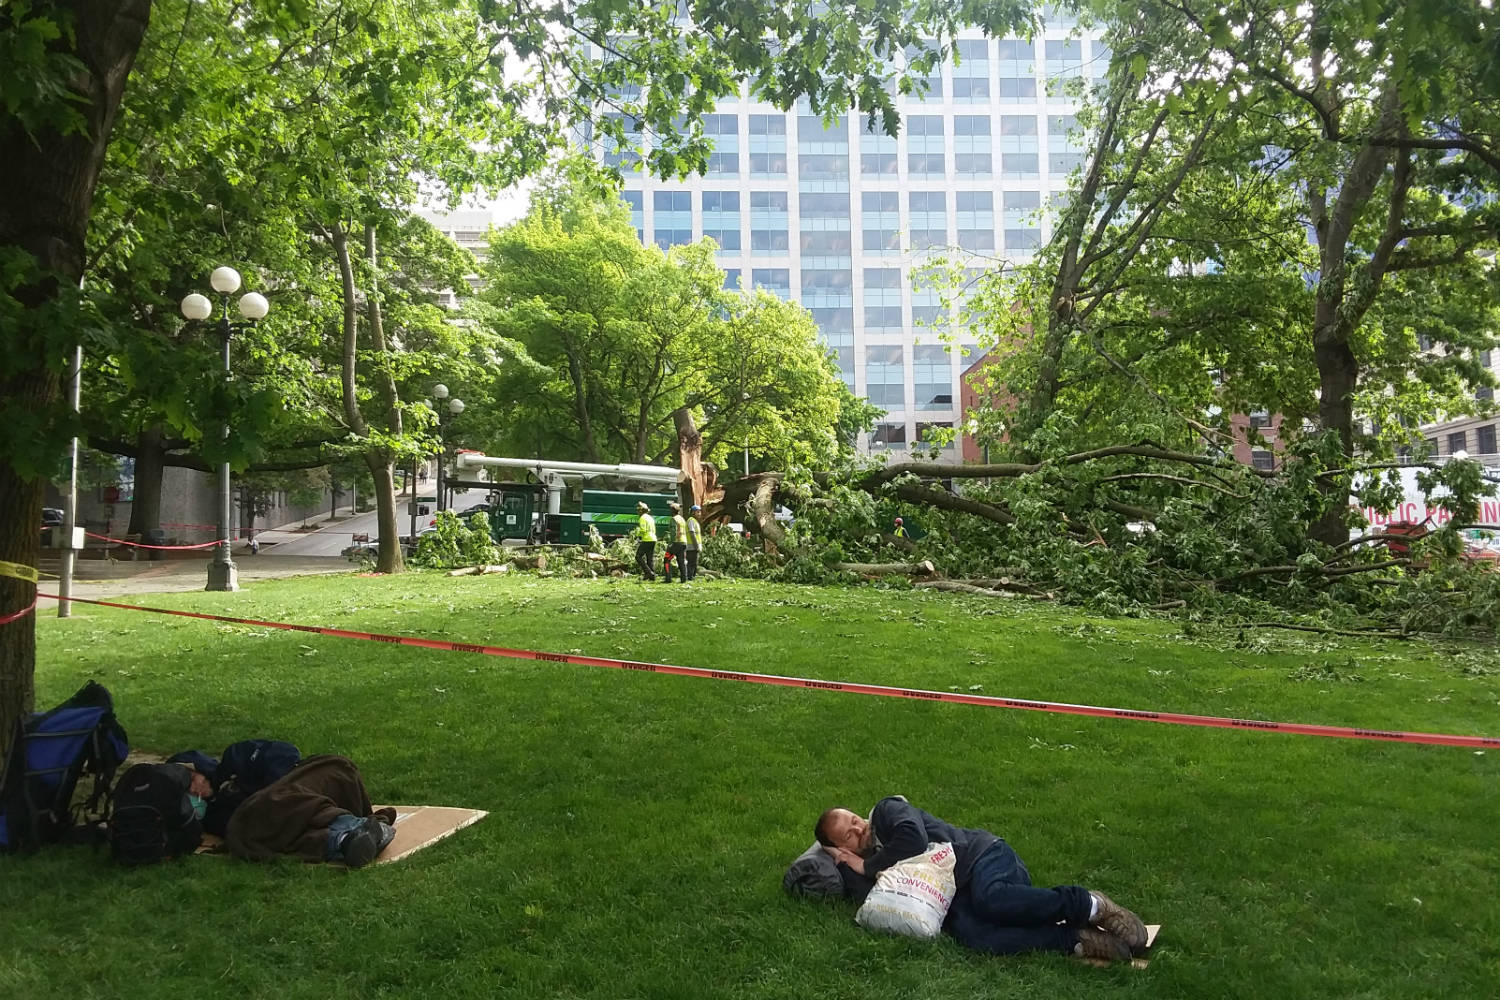 A homeless person sleeps in City Hall Park in front of work crews. Photo by Casey Jaywork